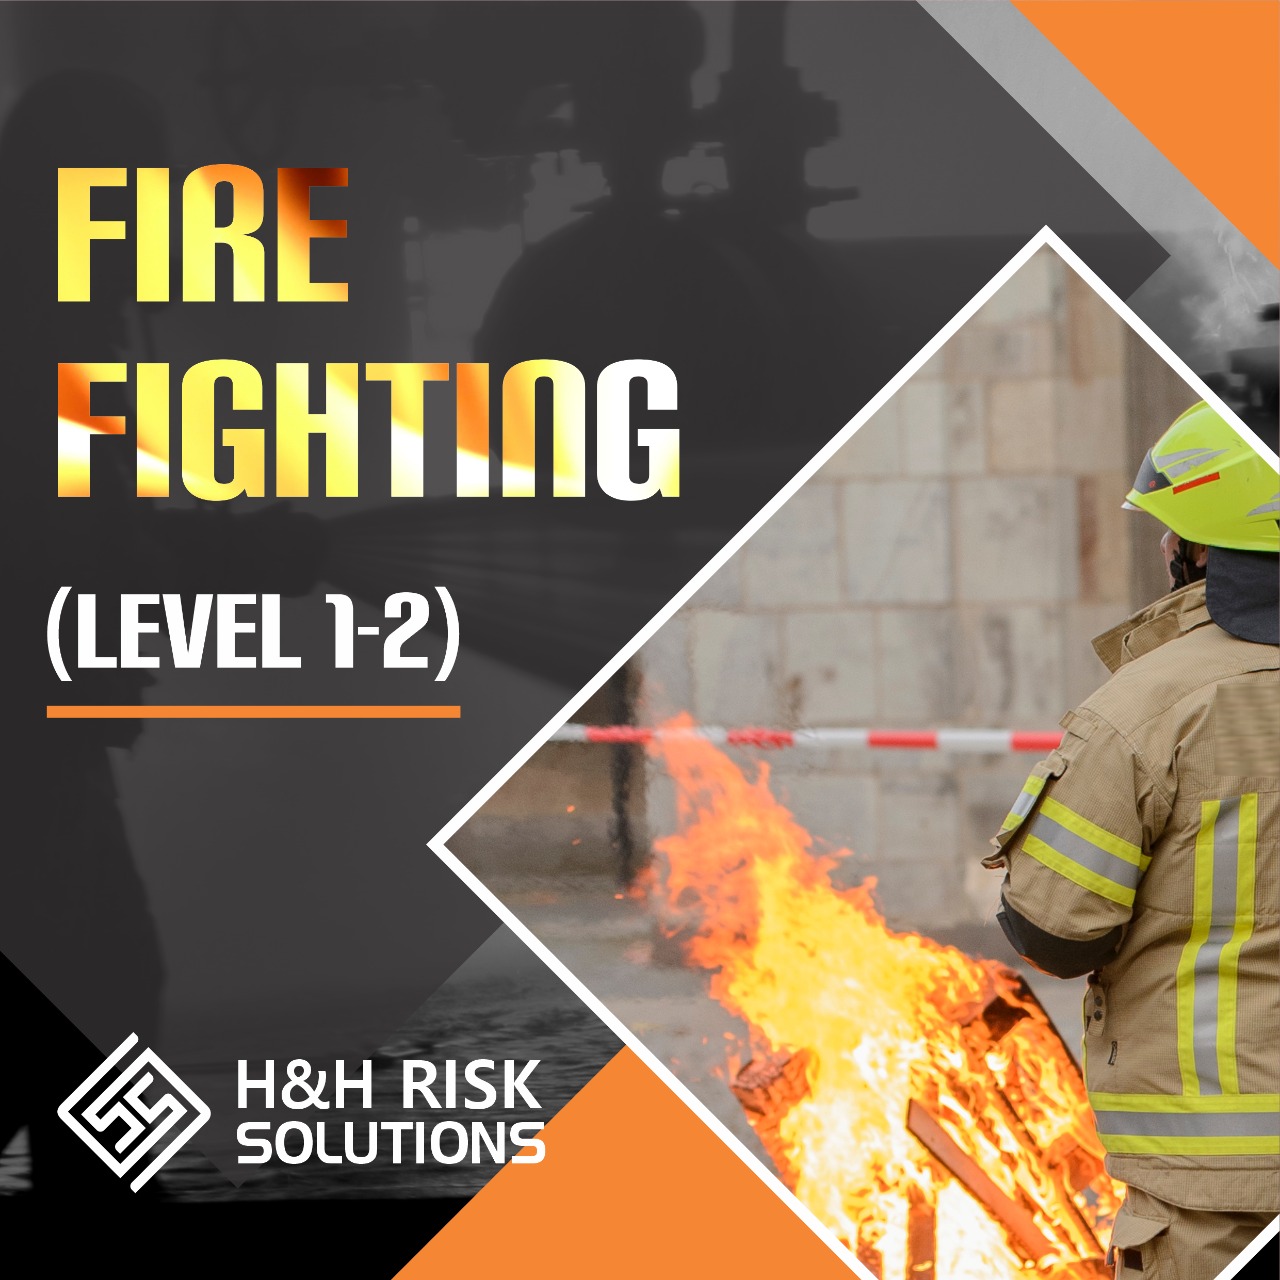 H & H Risk Solutions